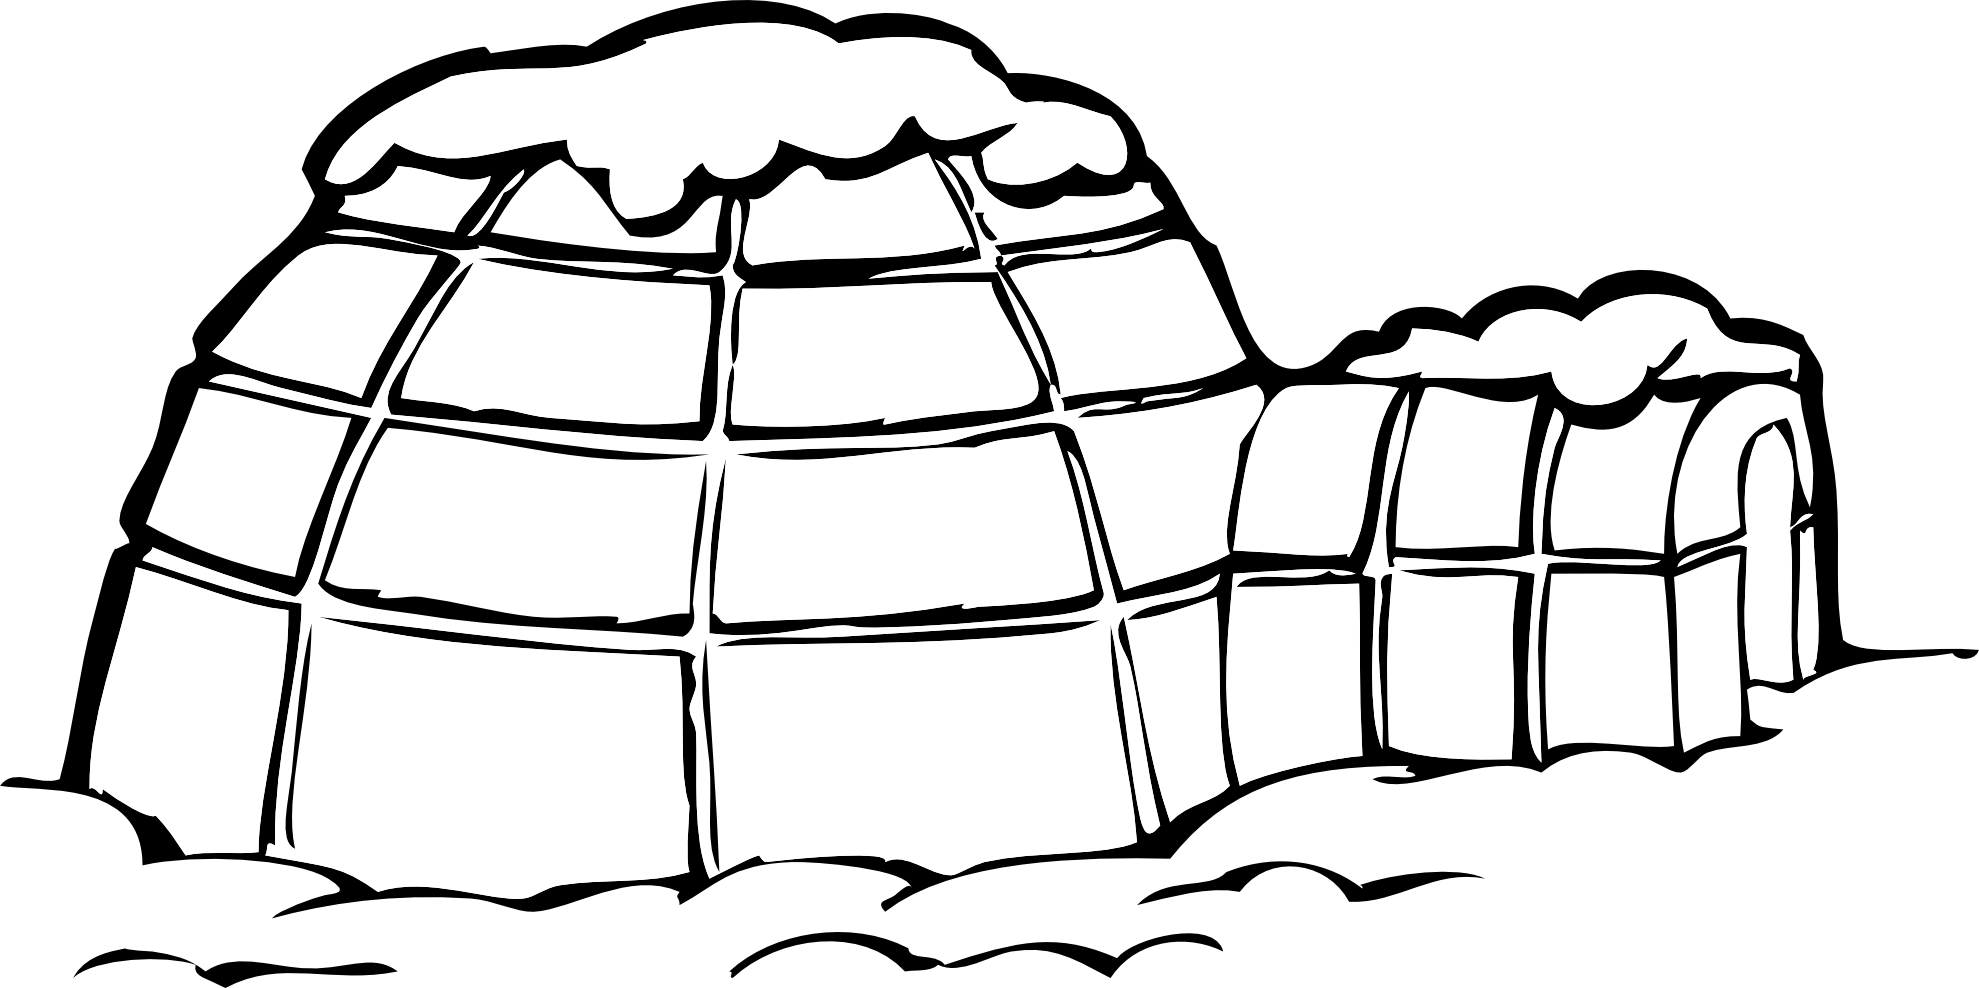 Igloo Clipart Black And White Igloo Clipart Black And White Png